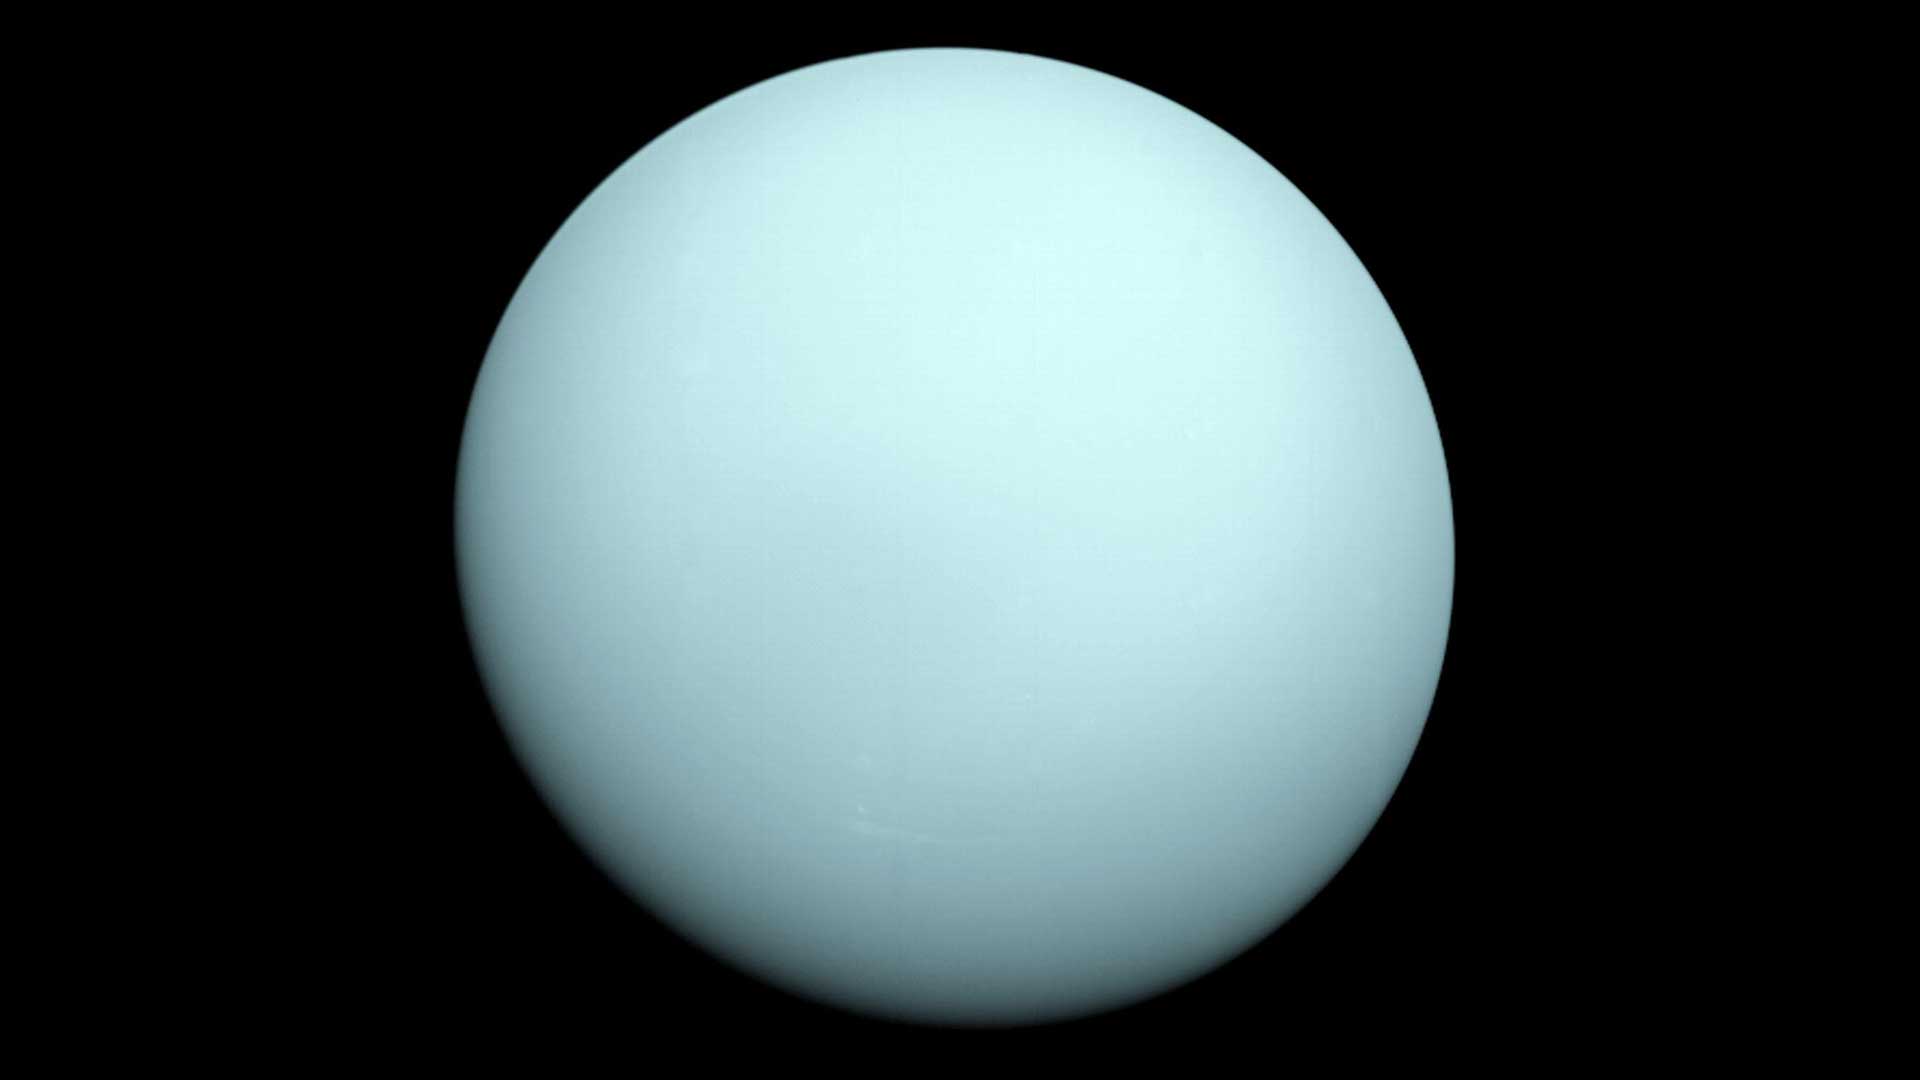 Pale blue planet Uranus is seen against the darkness of space in an image from the Voyager 2 spacecraft.